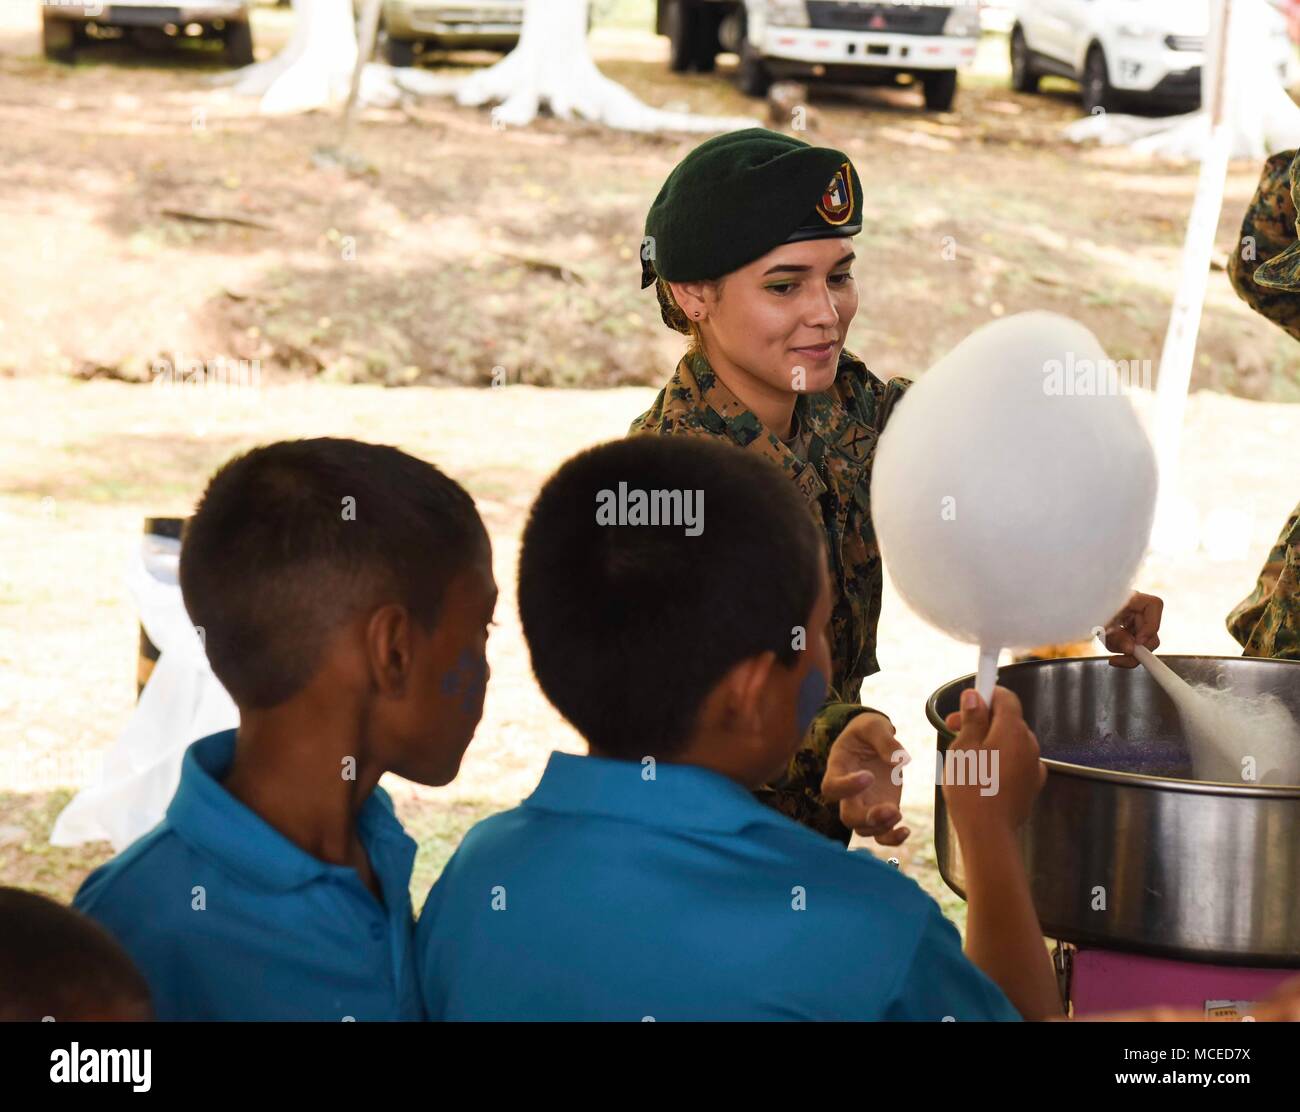 A member of the Panamanian National Border Service, known as SENAFRONT, passes cotton candy to children during the opening ceremony of Exercise New Horizons 2018, April 11, 2018, in Meteti, Panama. Exercise New Horizons is a joint-service operation, focused on enhancing relations with partner nations, providing aid to local communities and providing training U.S. military members. During the exercise, U.S. military members will build three schools, one community center and a women’s health ward in the Meteti area. They will also work closely with Panamanian health providers bringing medical ai Stock Photo